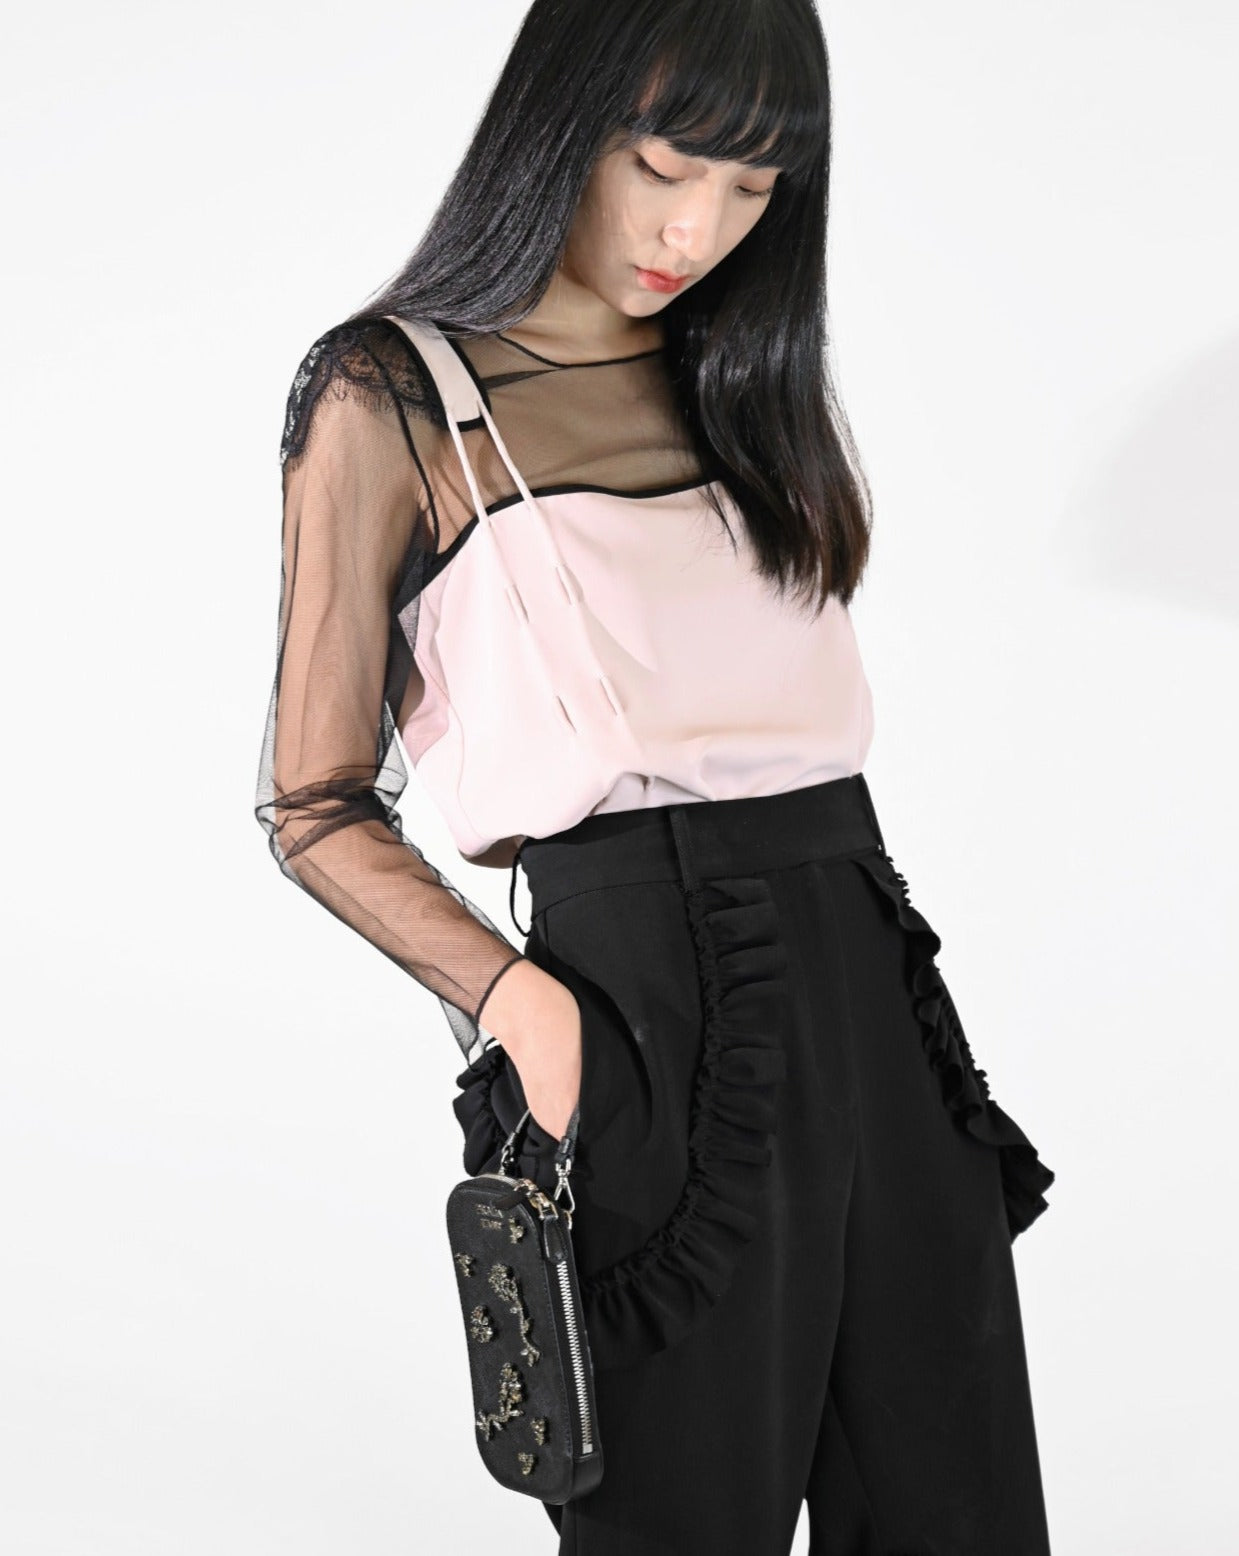 Load image into Gallery viewer, aalis KALINE cap lace string detail sleeveless top (Pink black)
